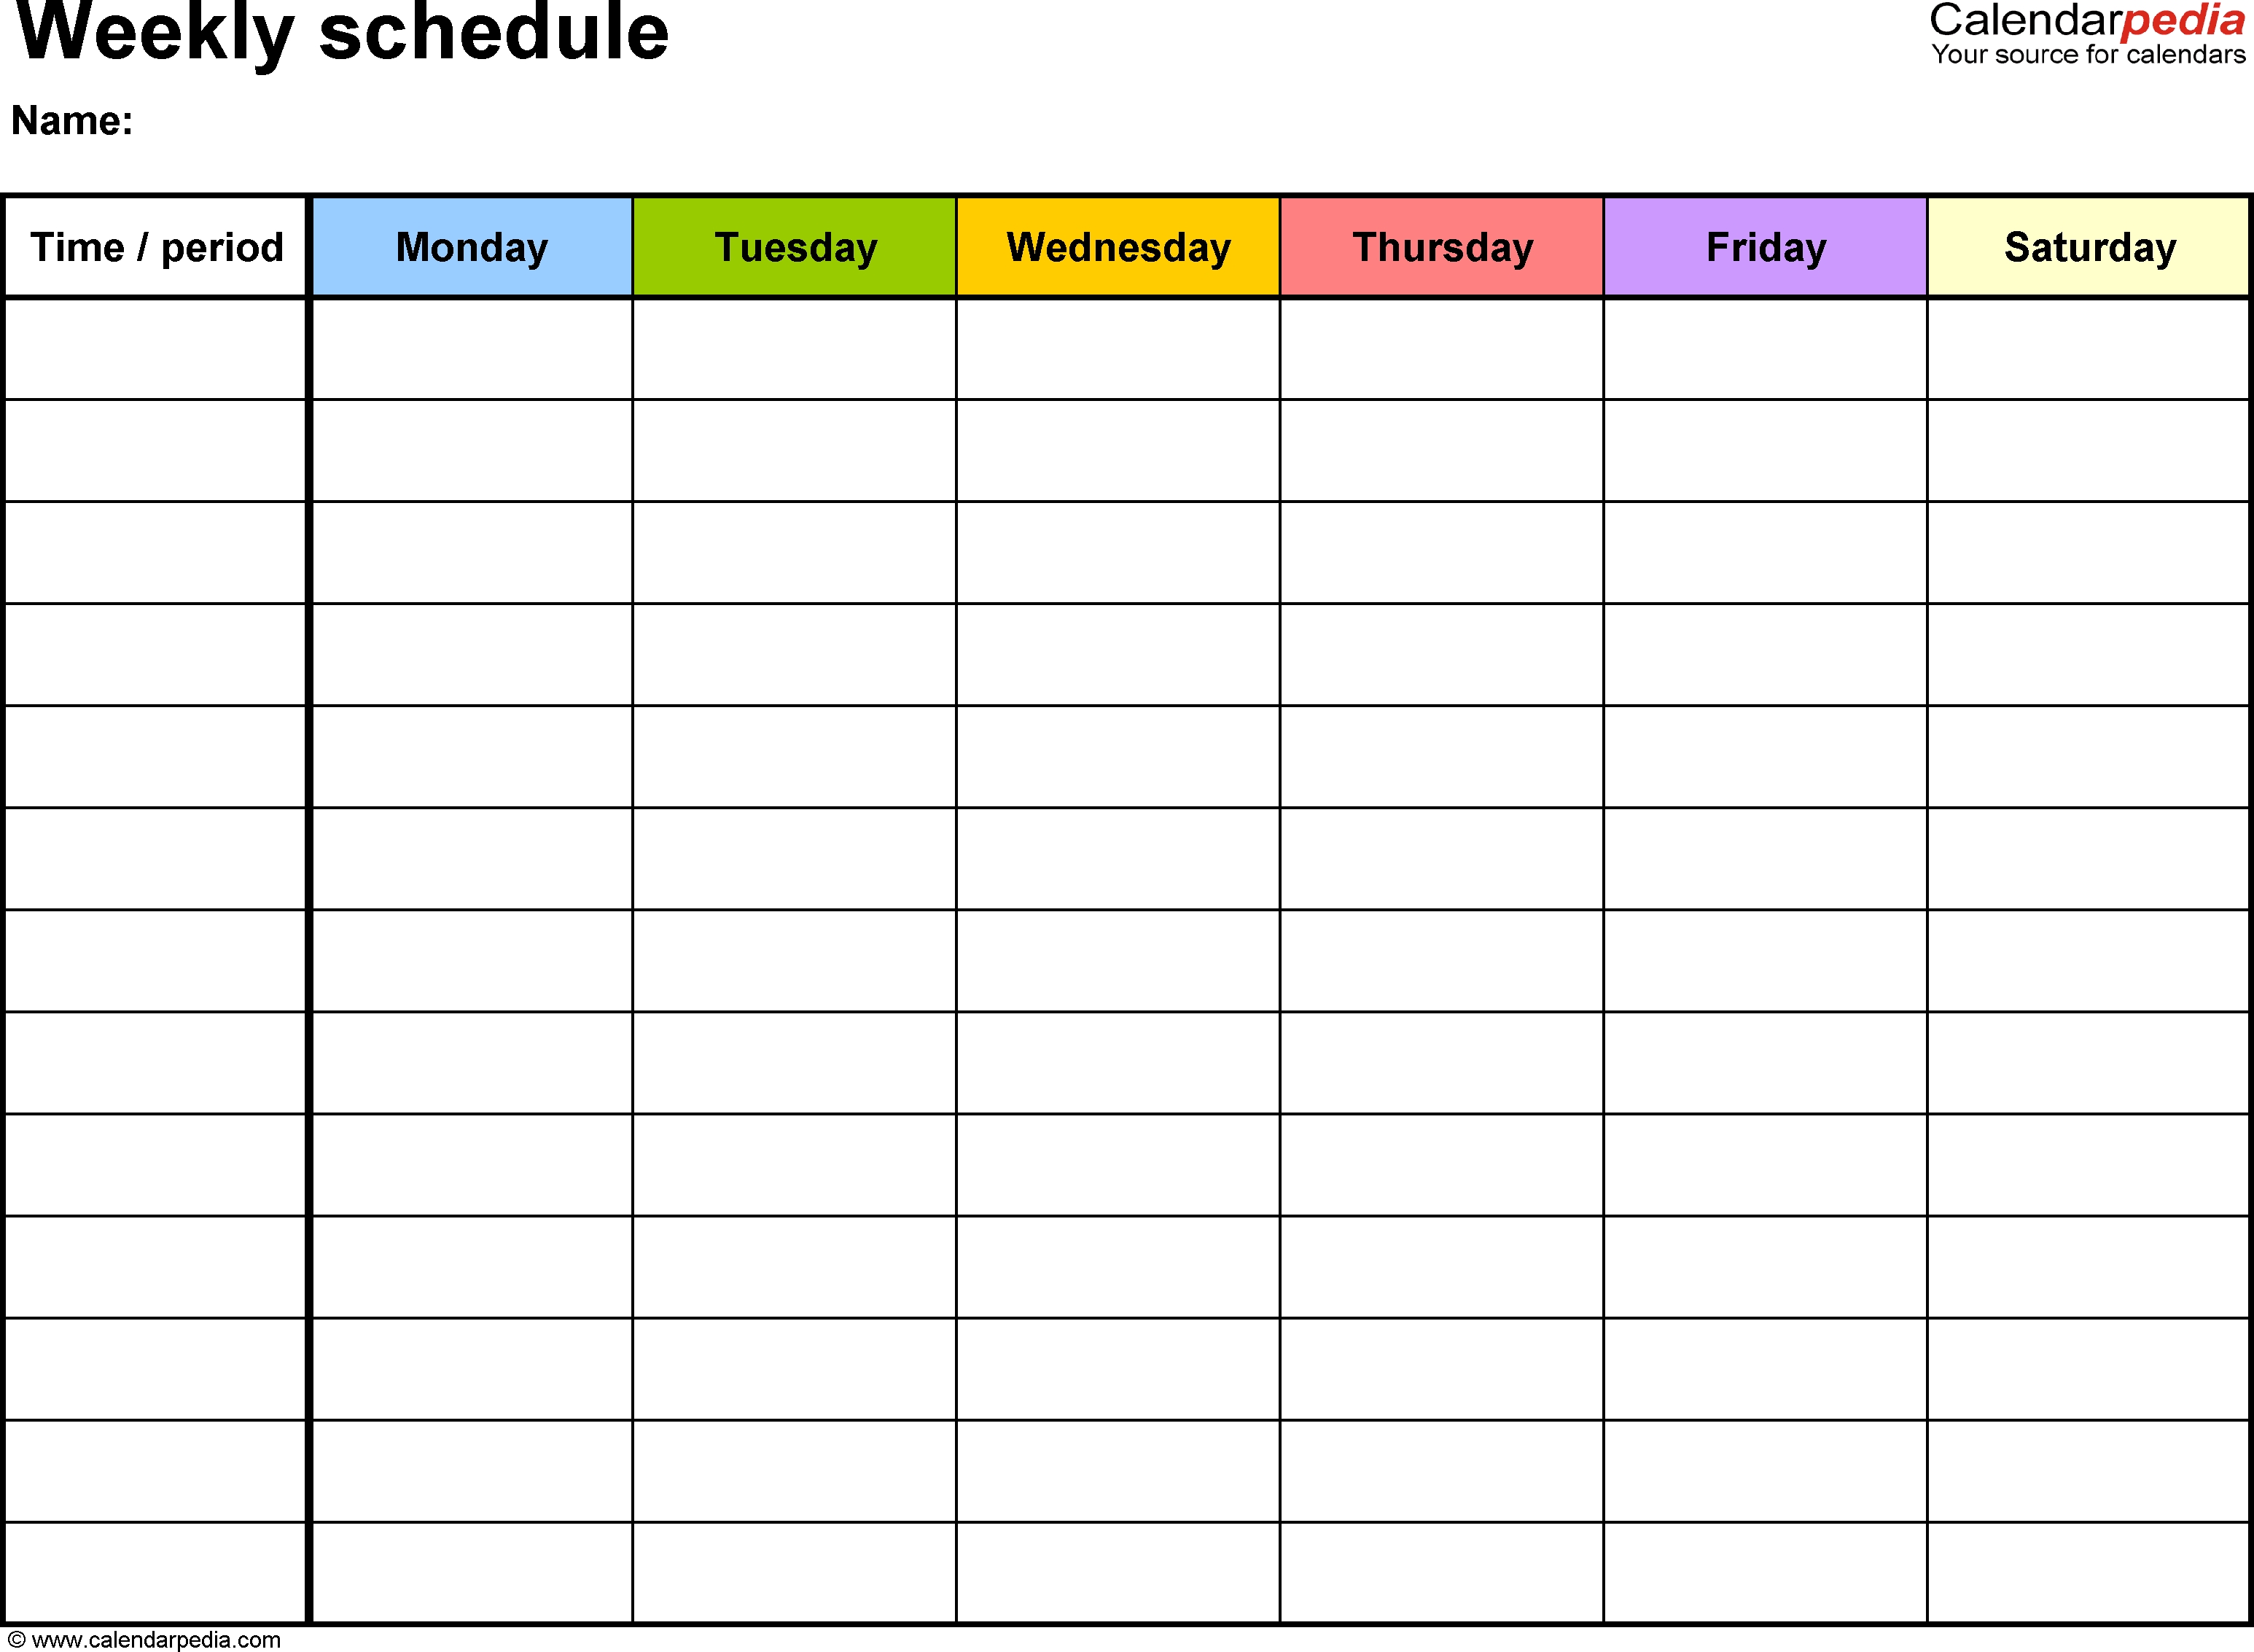 Free Weekly Schedule Templates For Word - 18 Templates throughout Weekly Monday Through Friday Appointment